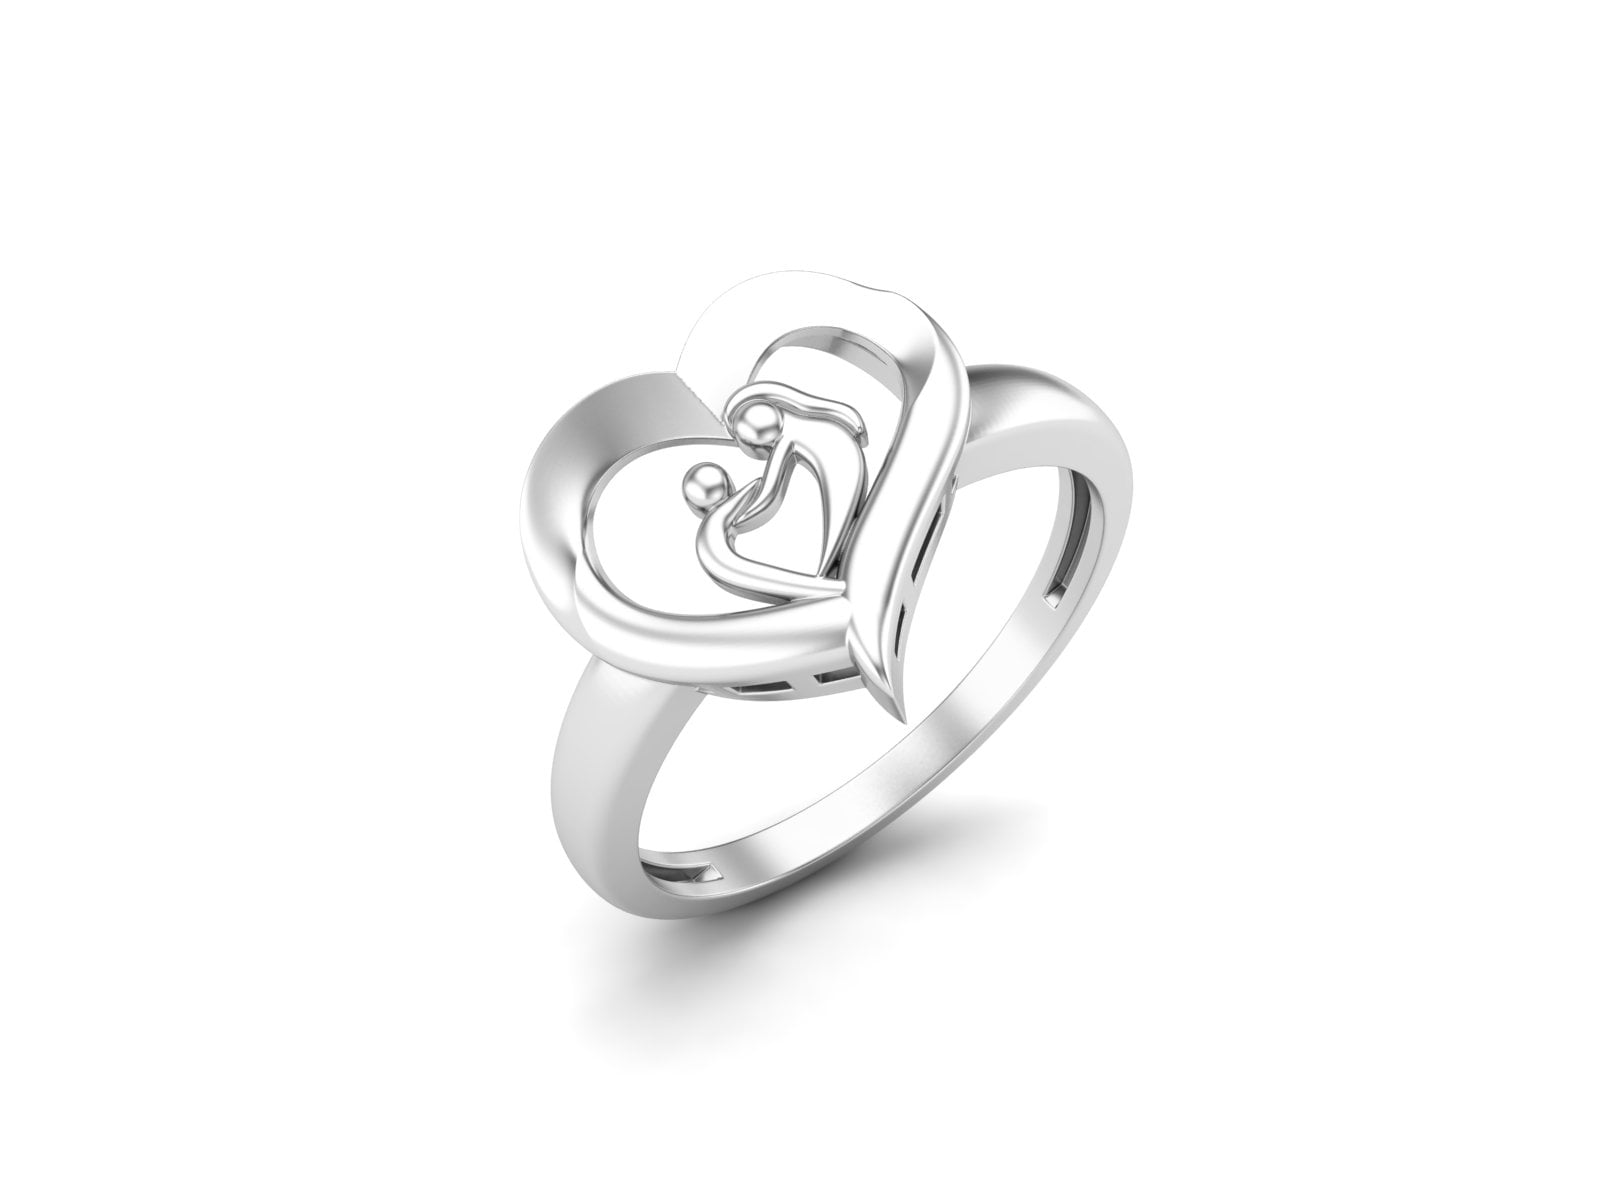 Baby / Child Rope Ring. Wholesale Sterling Silver Ring - 925Express